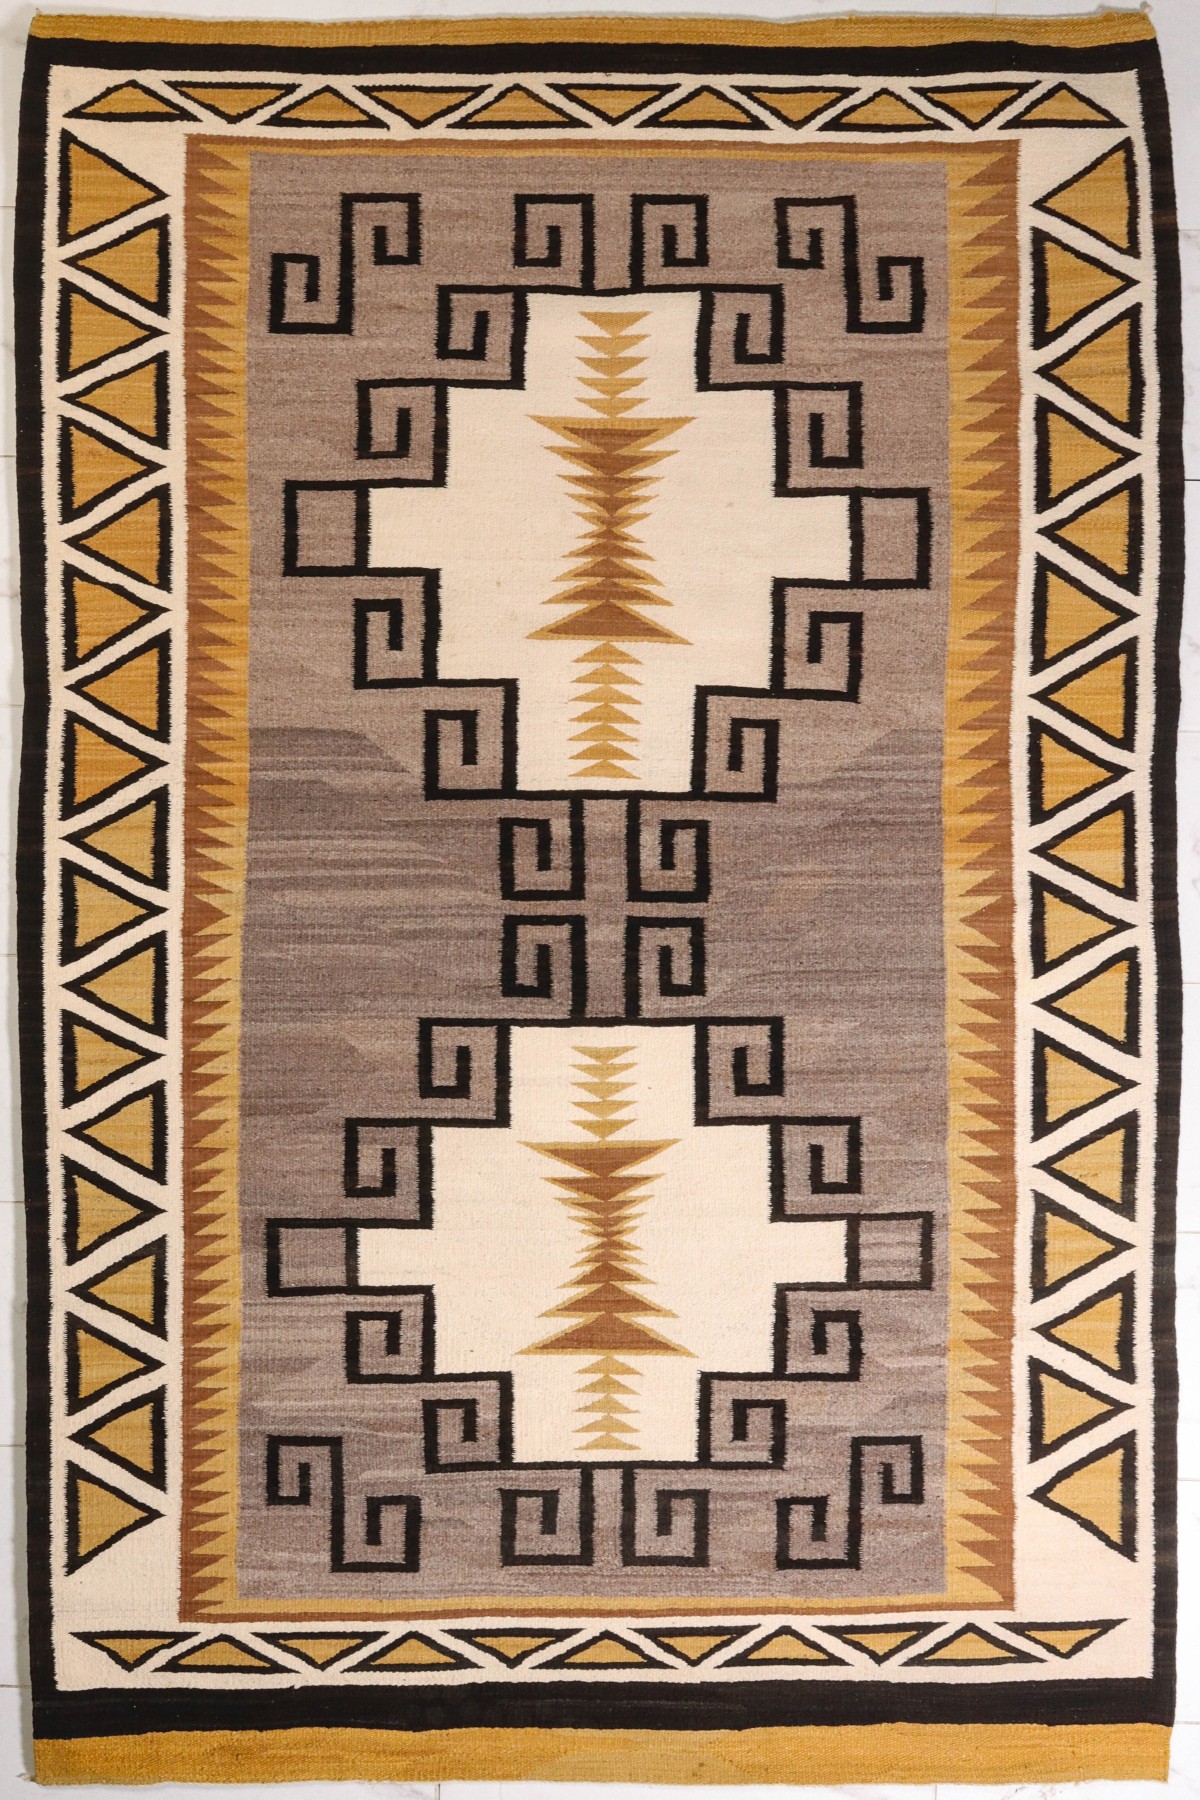 A FINE LARGE NICELY WOVEN NAVAJO RUG